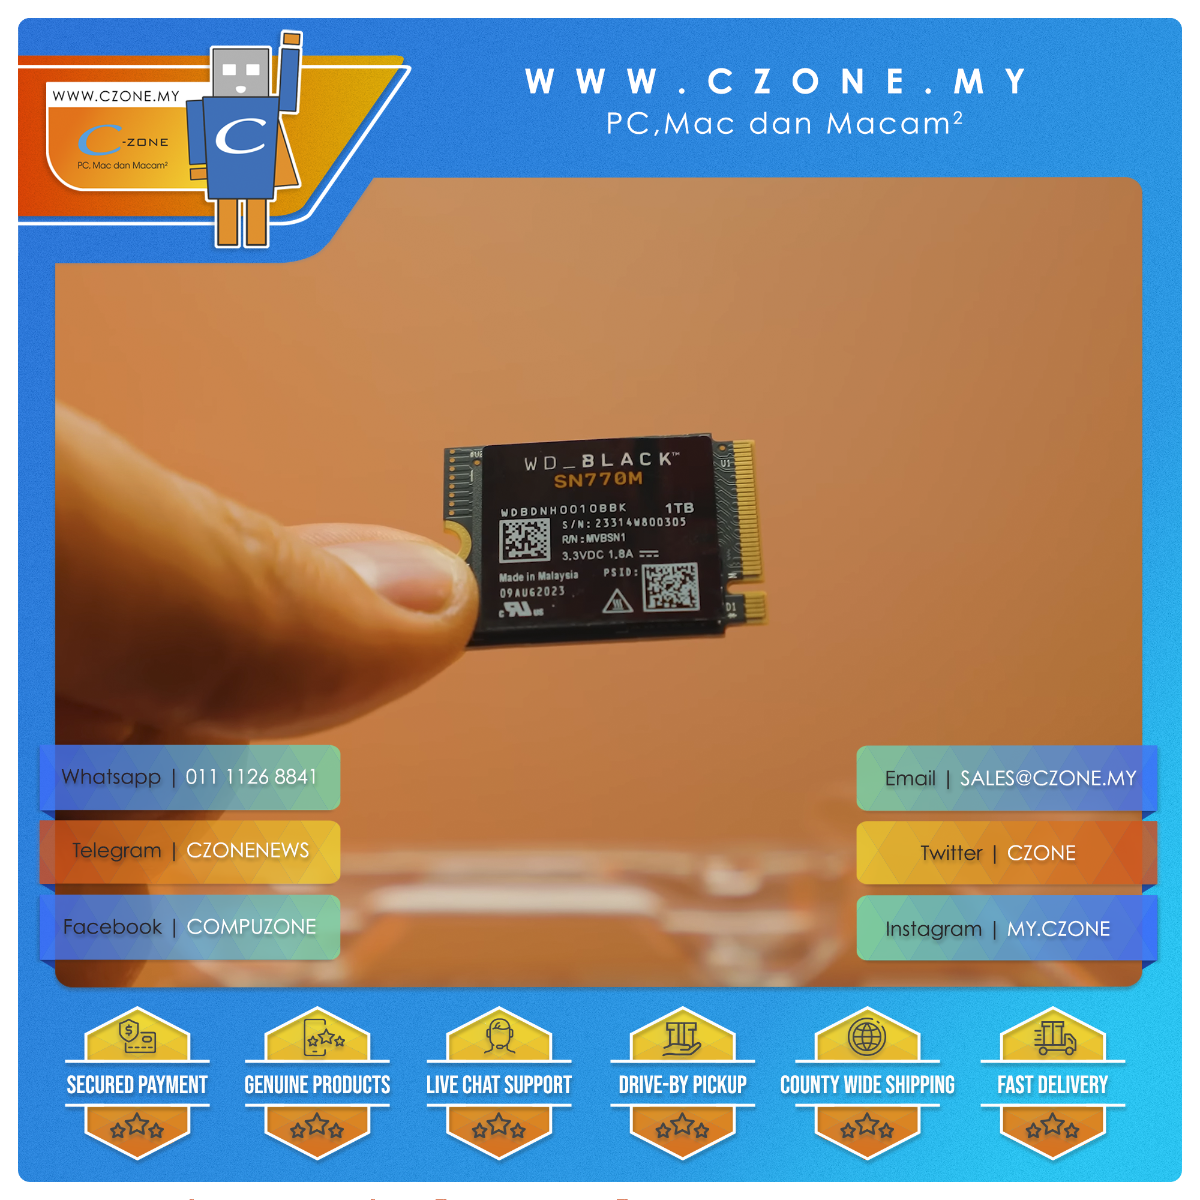 https://czone.my/czone/computer-components/storage-devices/ssd-solid-state-drives.html